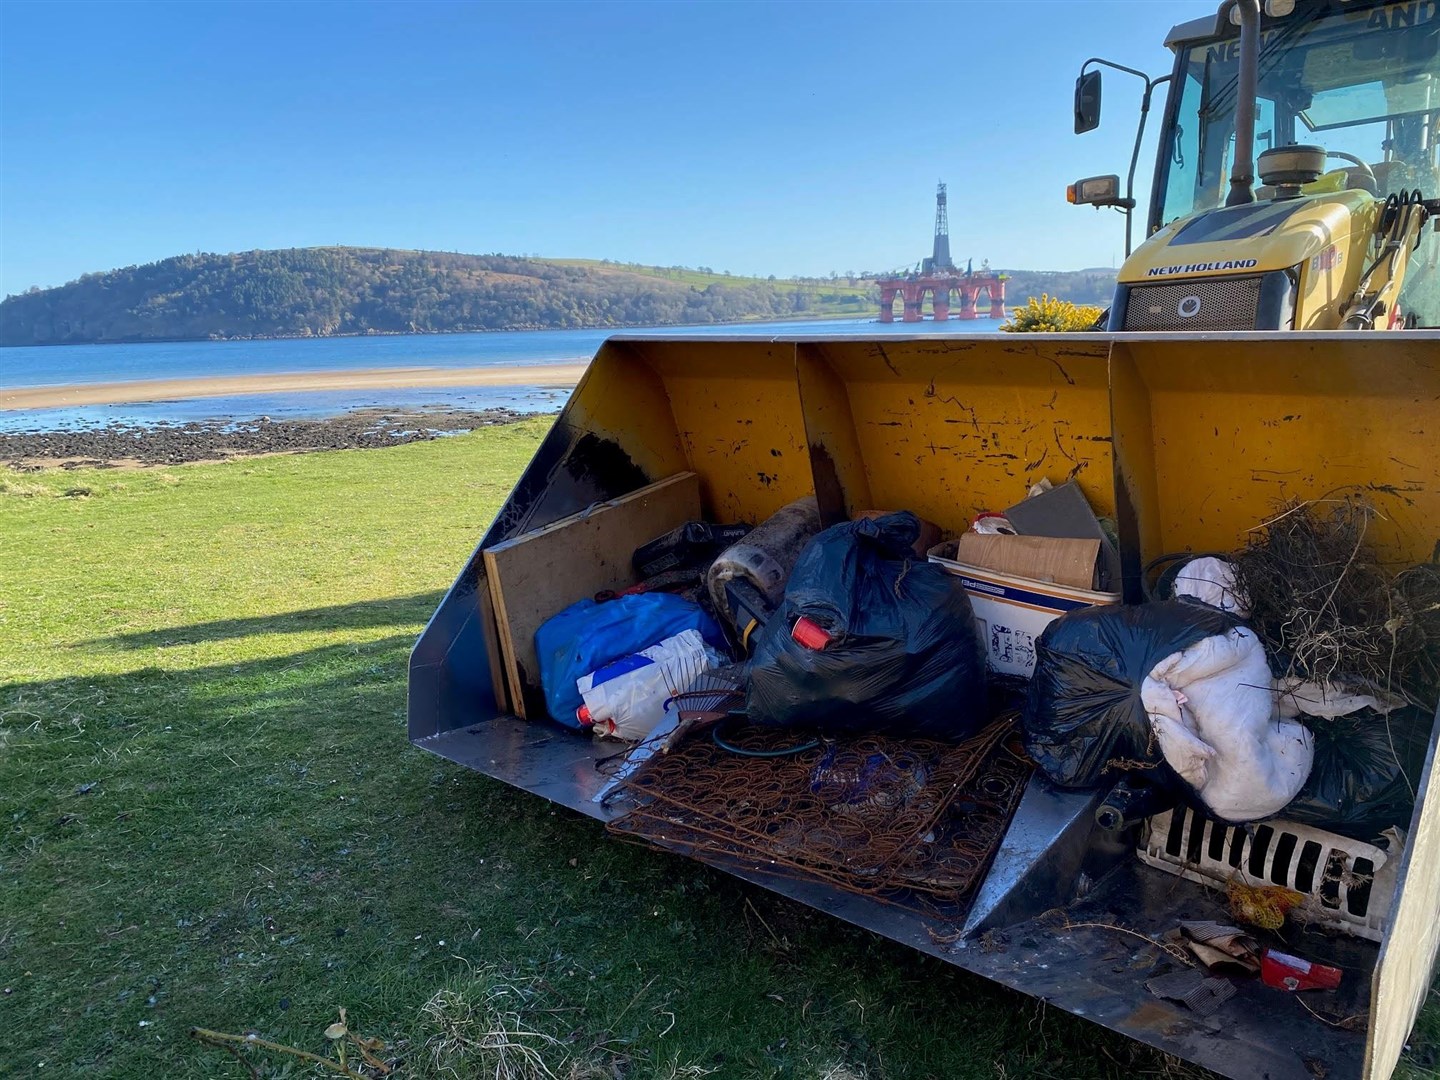 A bucketload of flytipped rubbish collected this week at Nigg, next to a nature reserve that enjoys protected status. The Cromarty Firth, in the background, is also a Site of Special Scientific Interest.